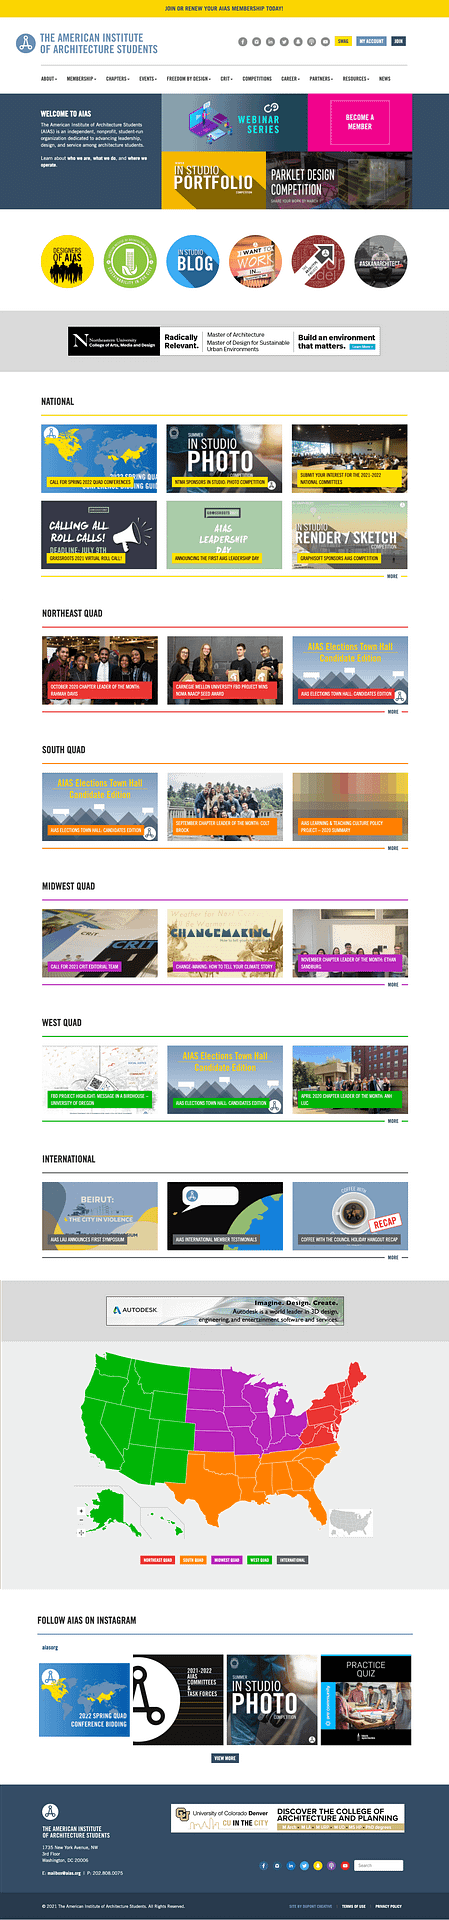 American Institute of Architecture Students website design detail